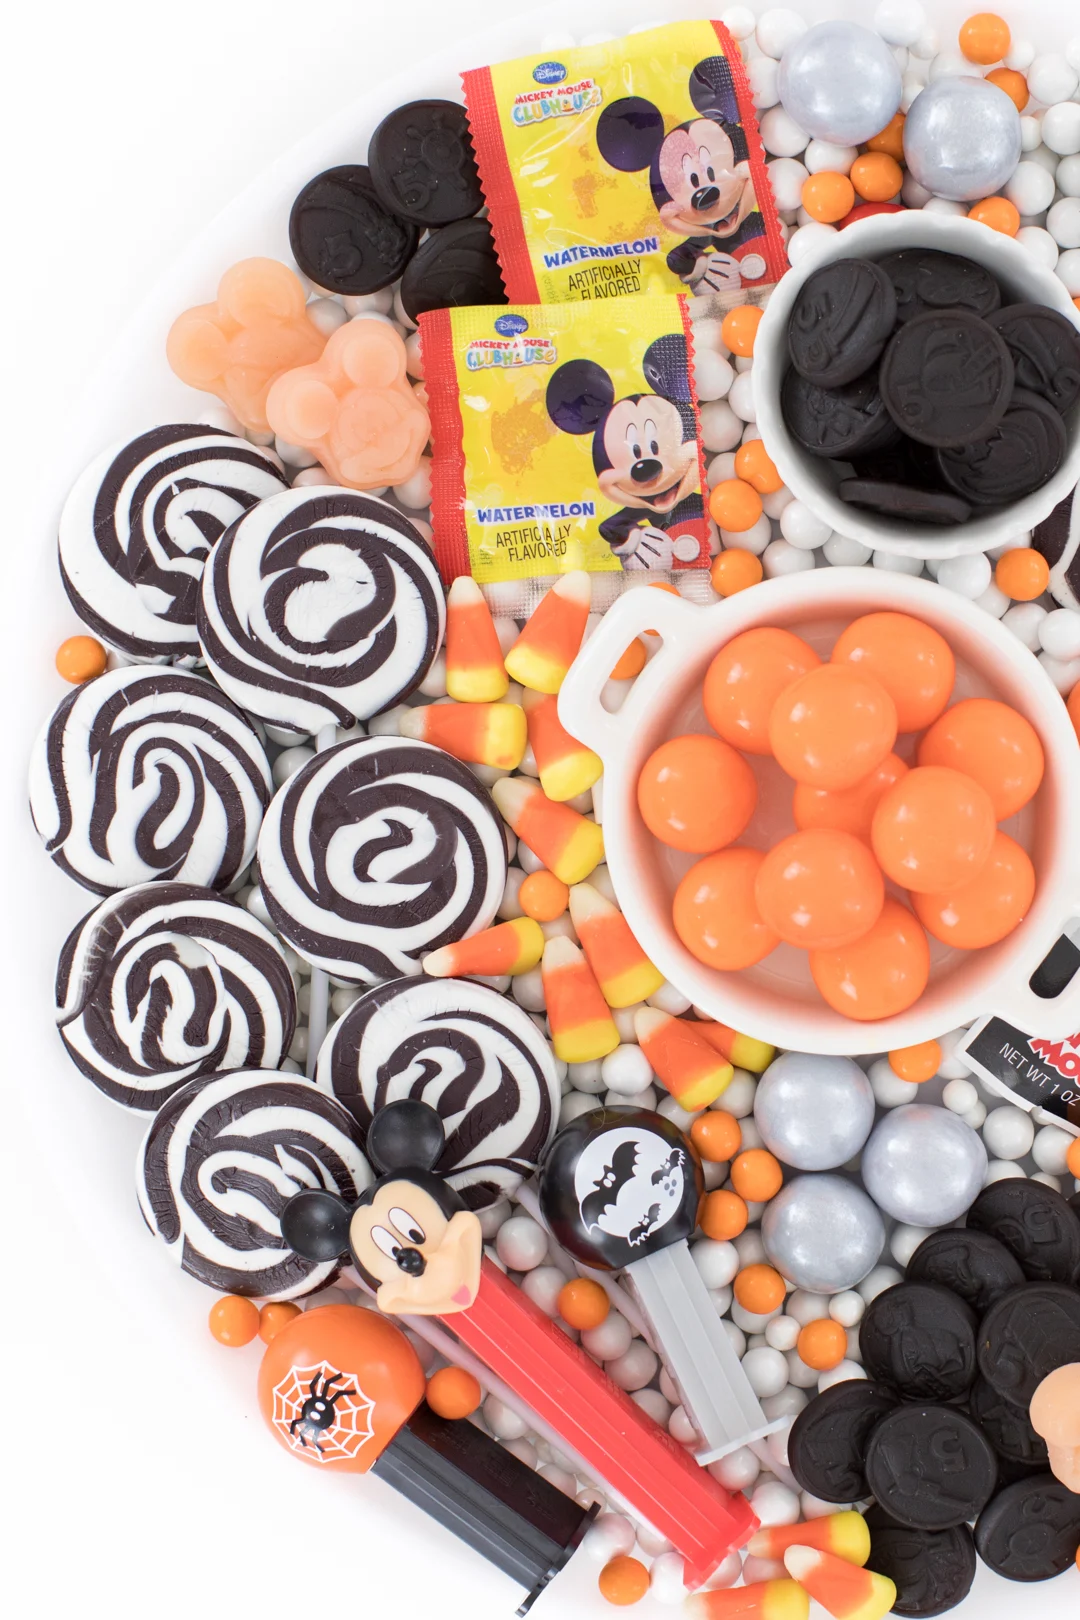 Black, white and orange themed halloween candy platter with Mickey Mouse theme.